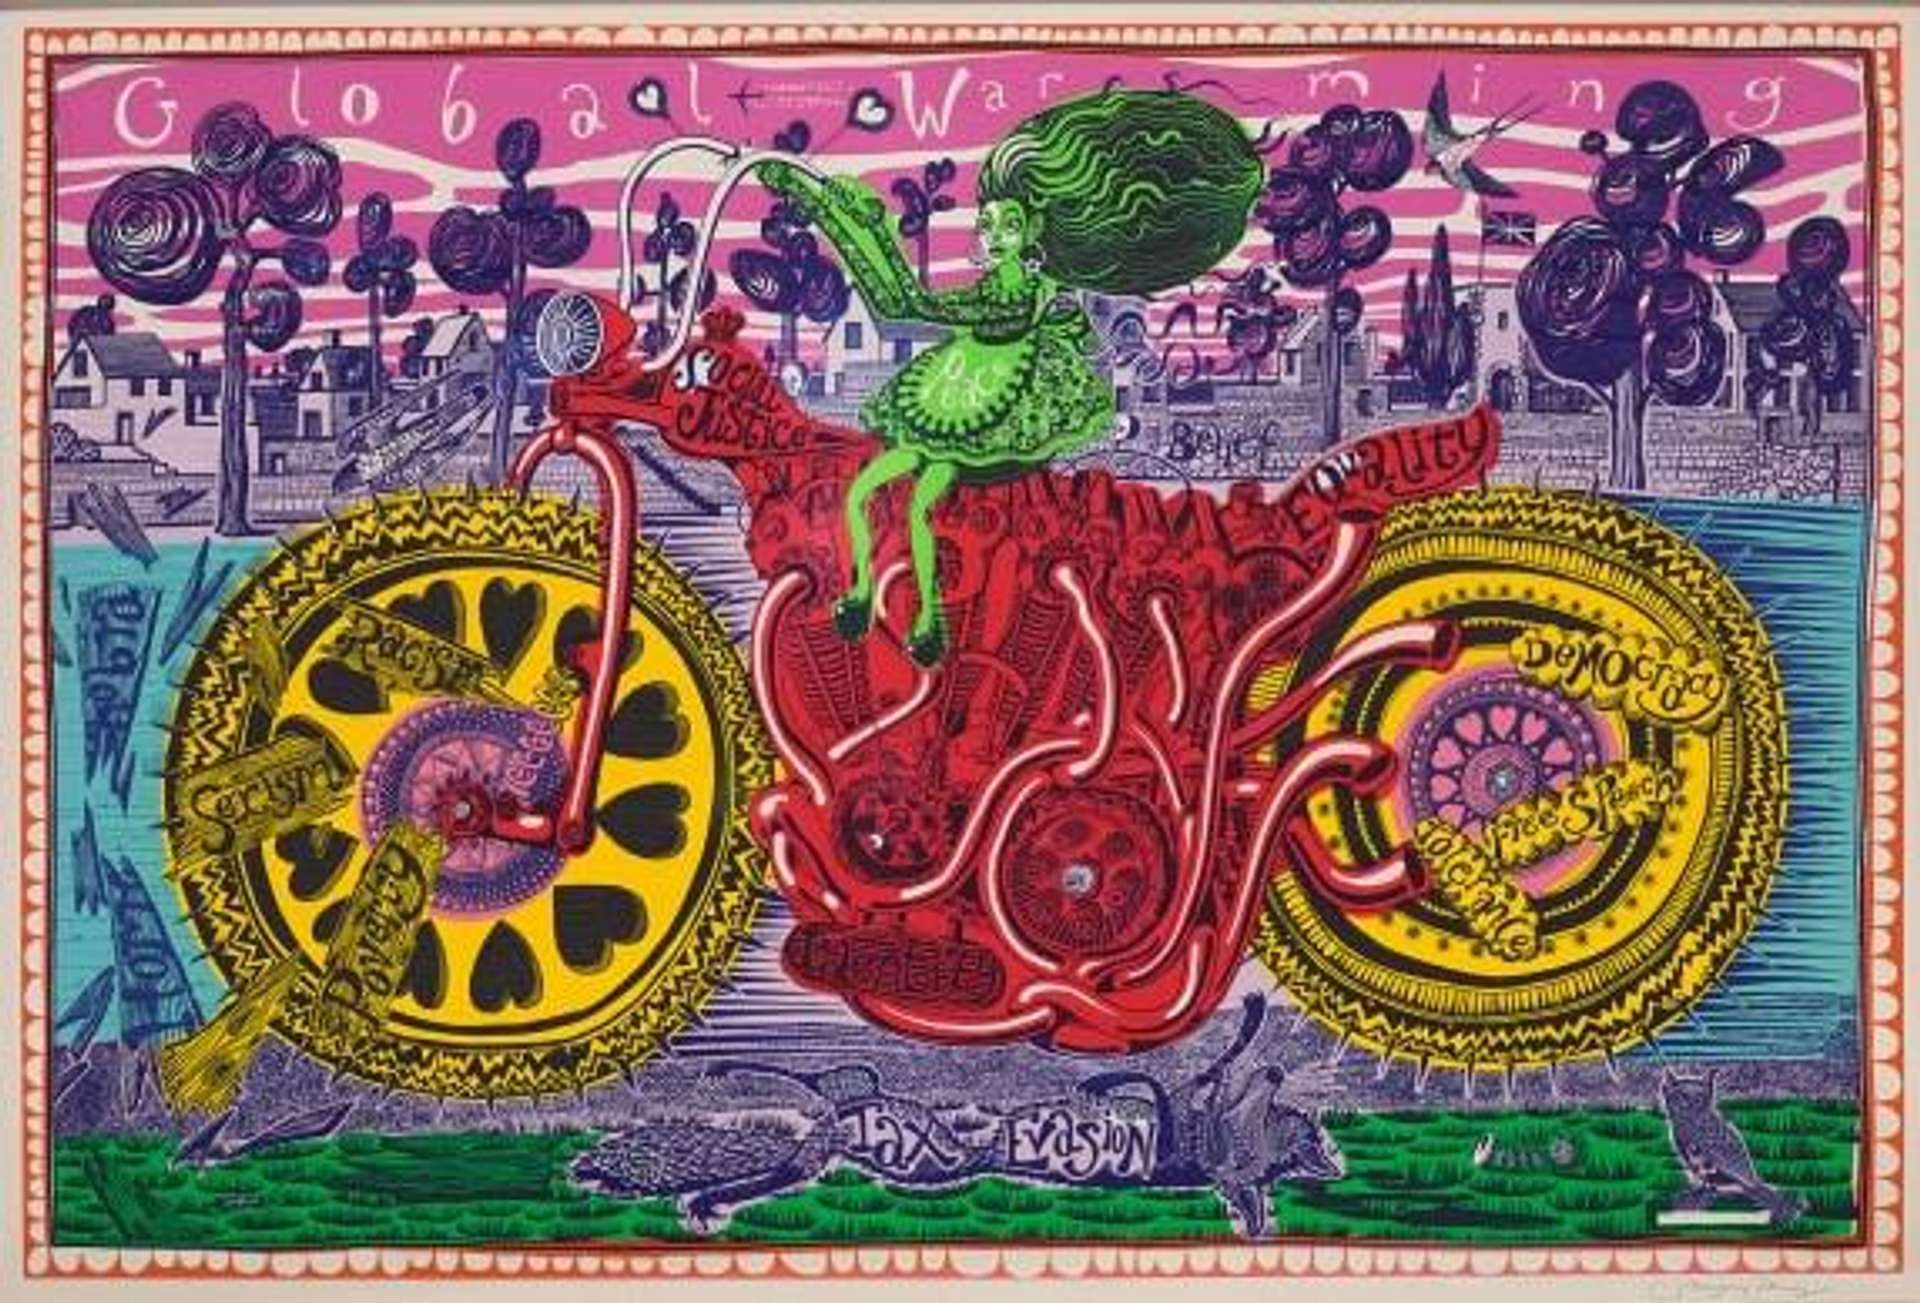 An etching by Grayson Perry depicting a green, Amazon-like figure intent on riding a bright red and yellow carriage, while surrounded by a phantasmagoric purple and pink background